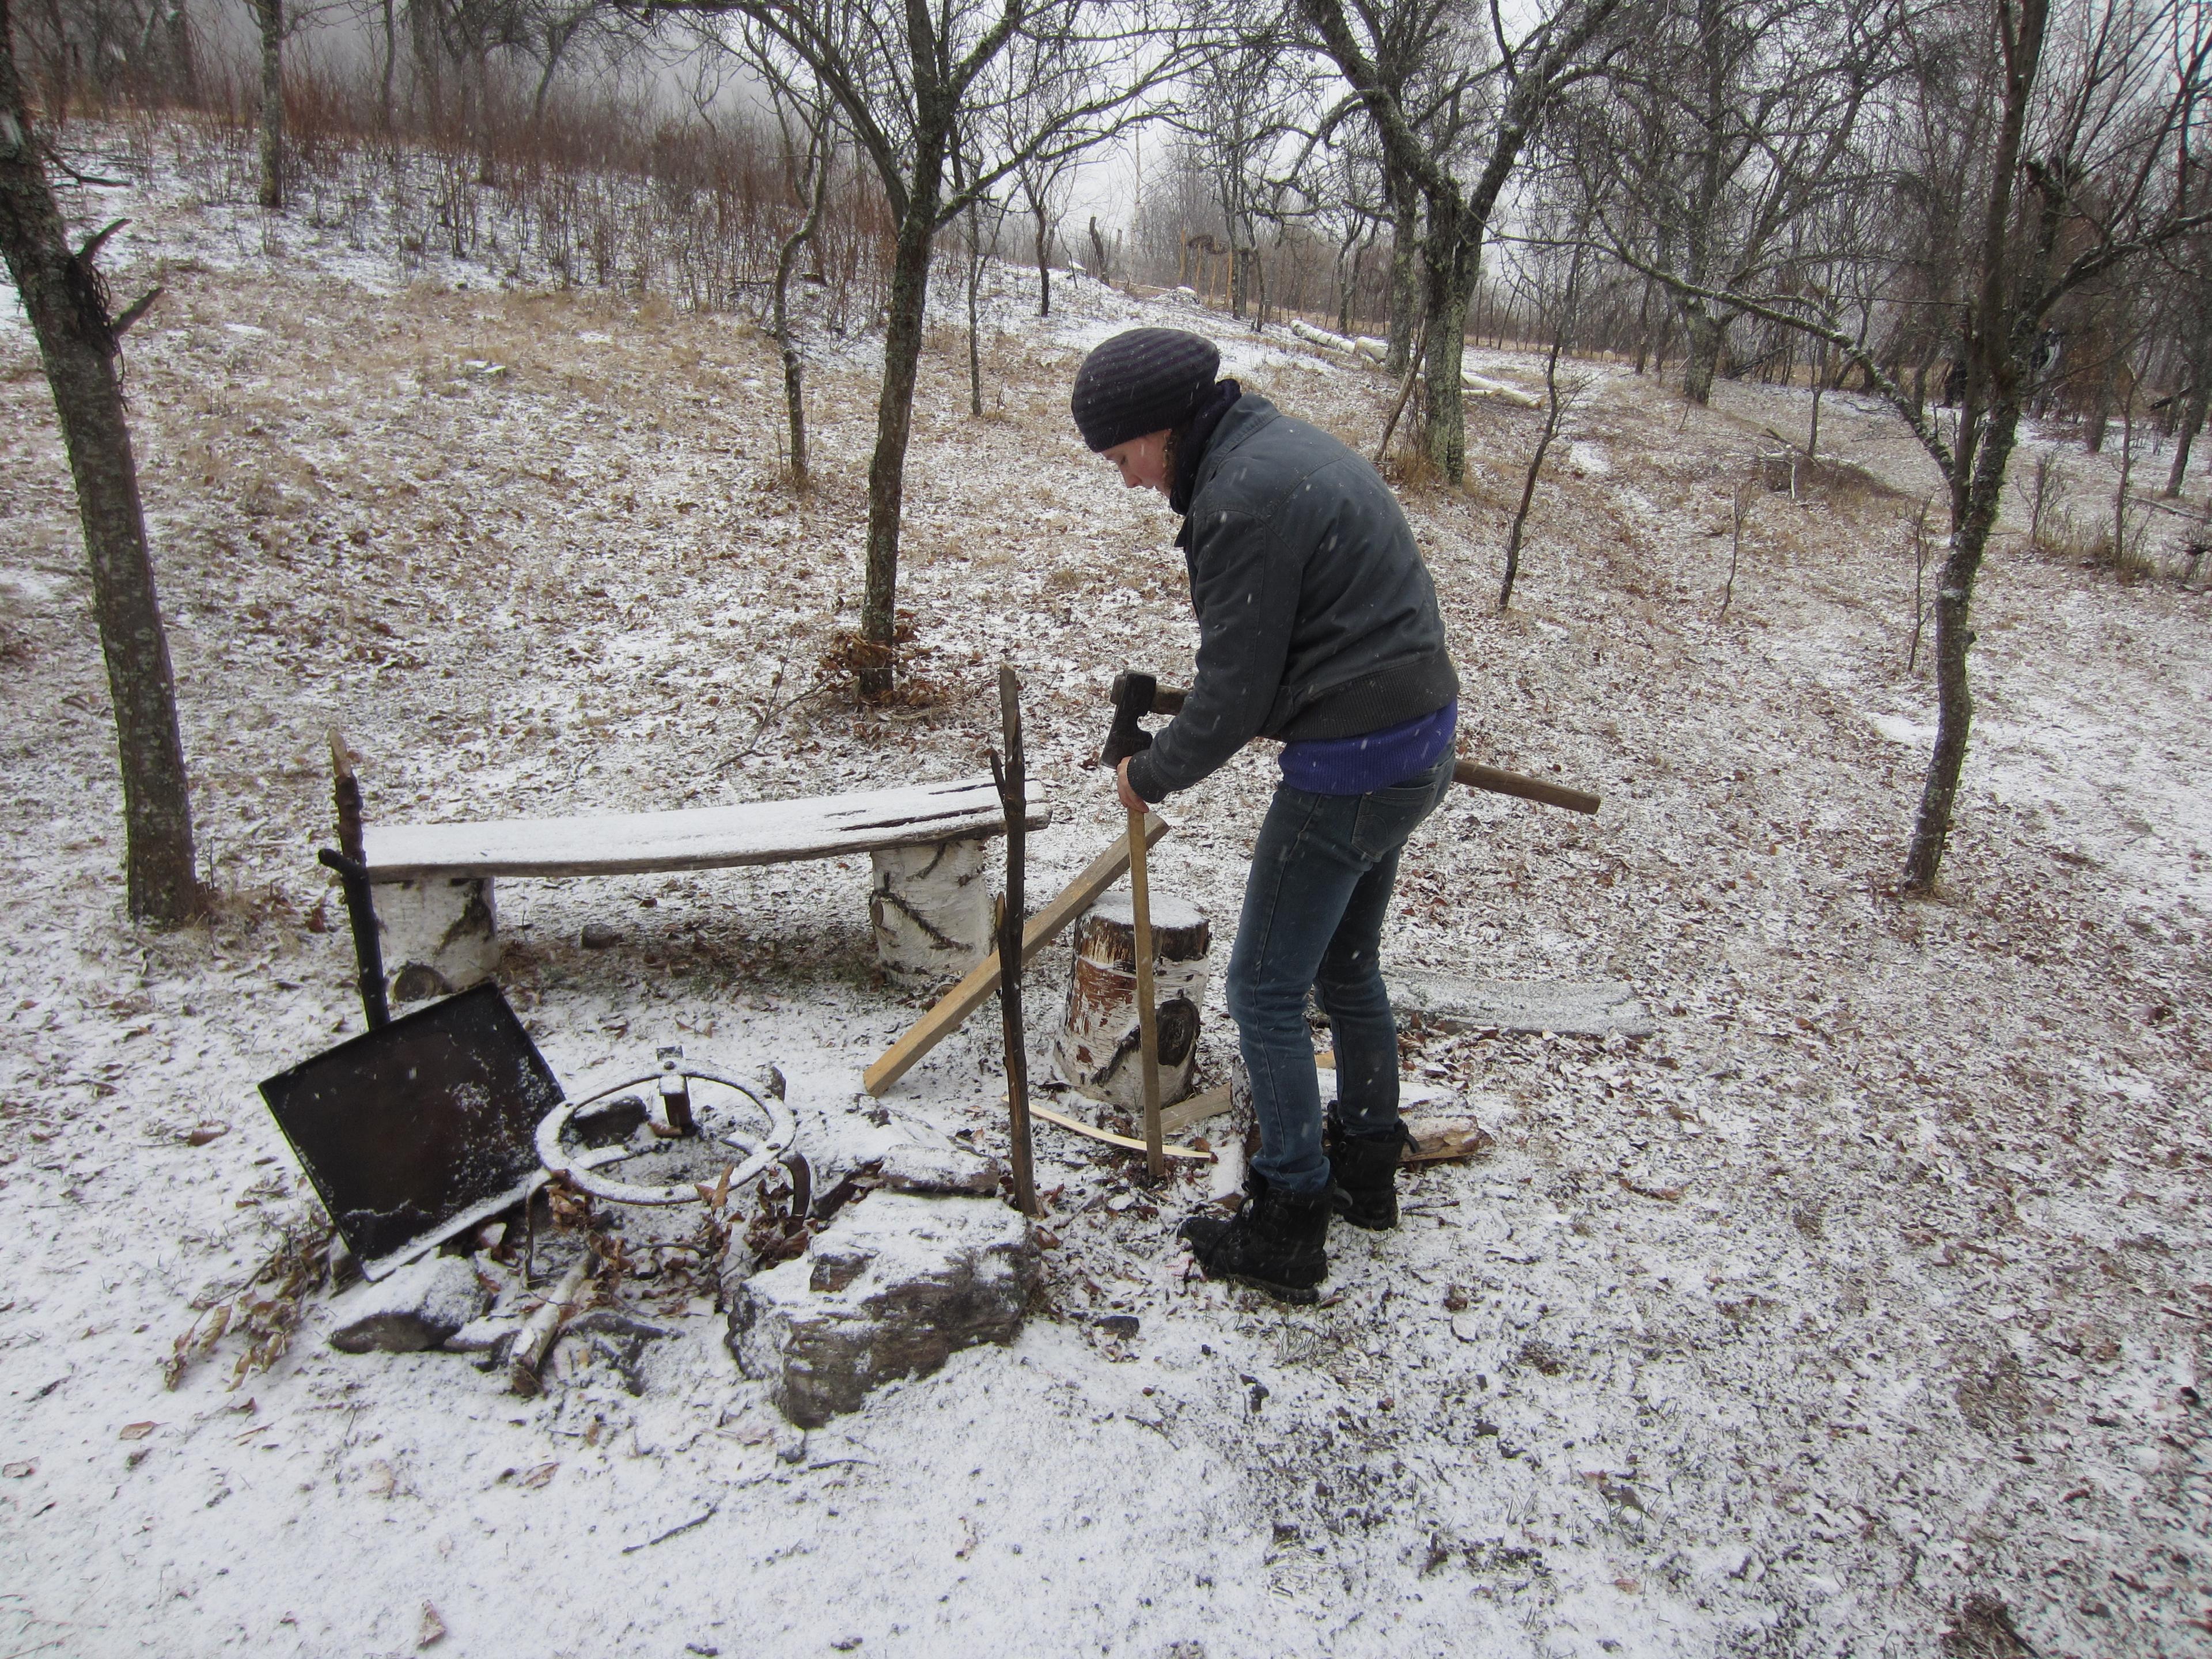 A woman is setting up a construction for bbq, outdoors in snow